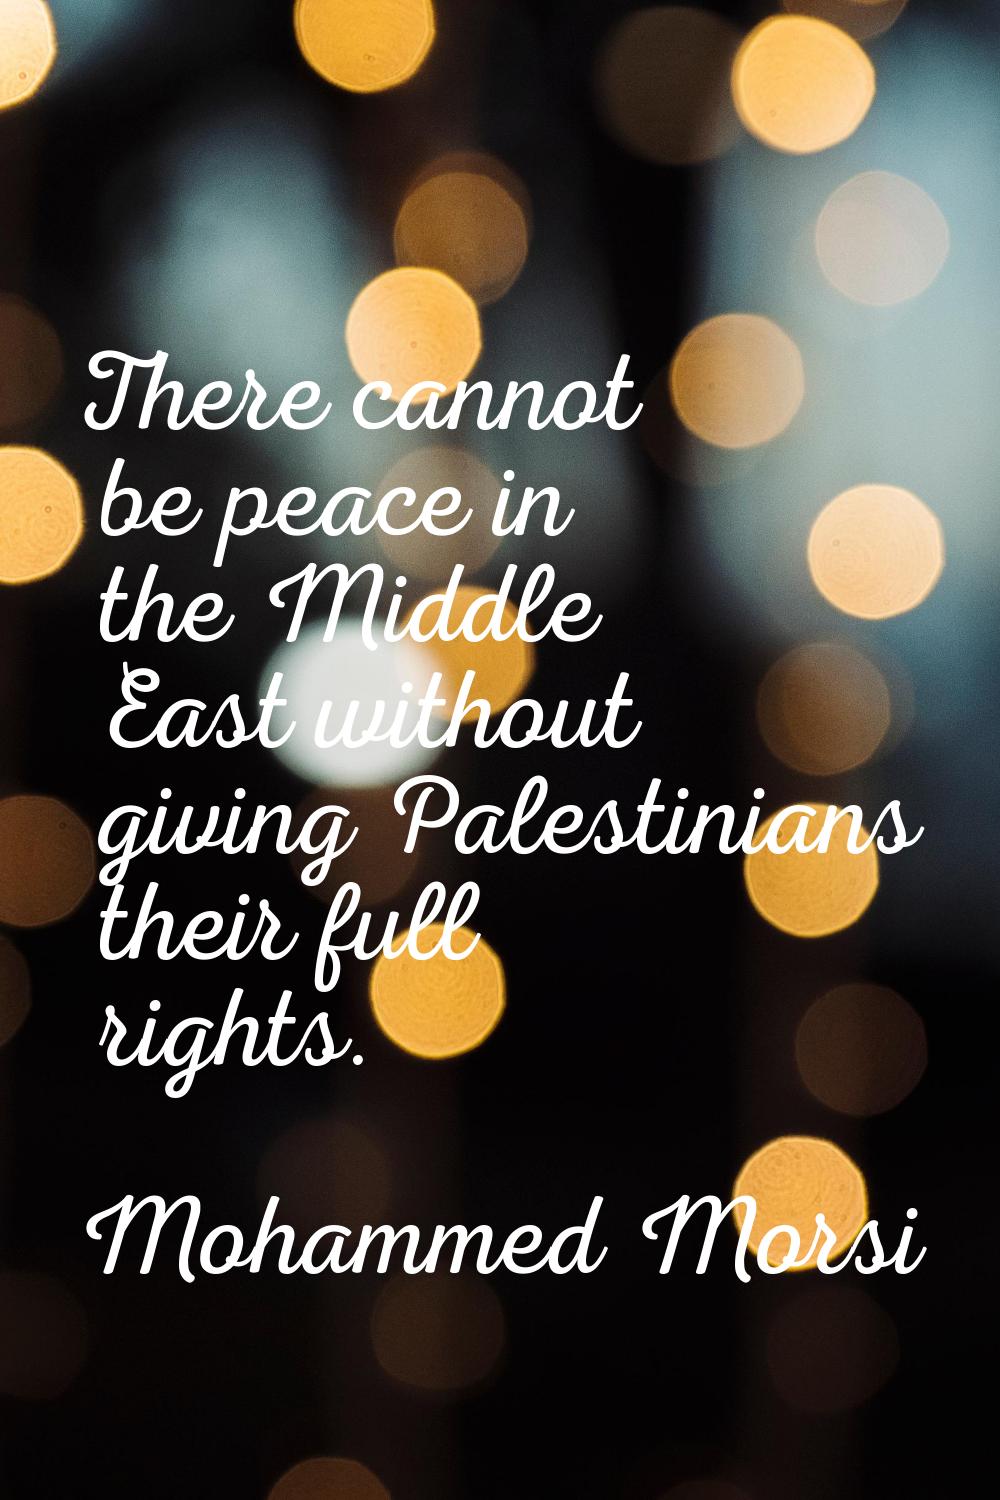 There cannot be peace in the Middle East without giving Palestinians their full rights.